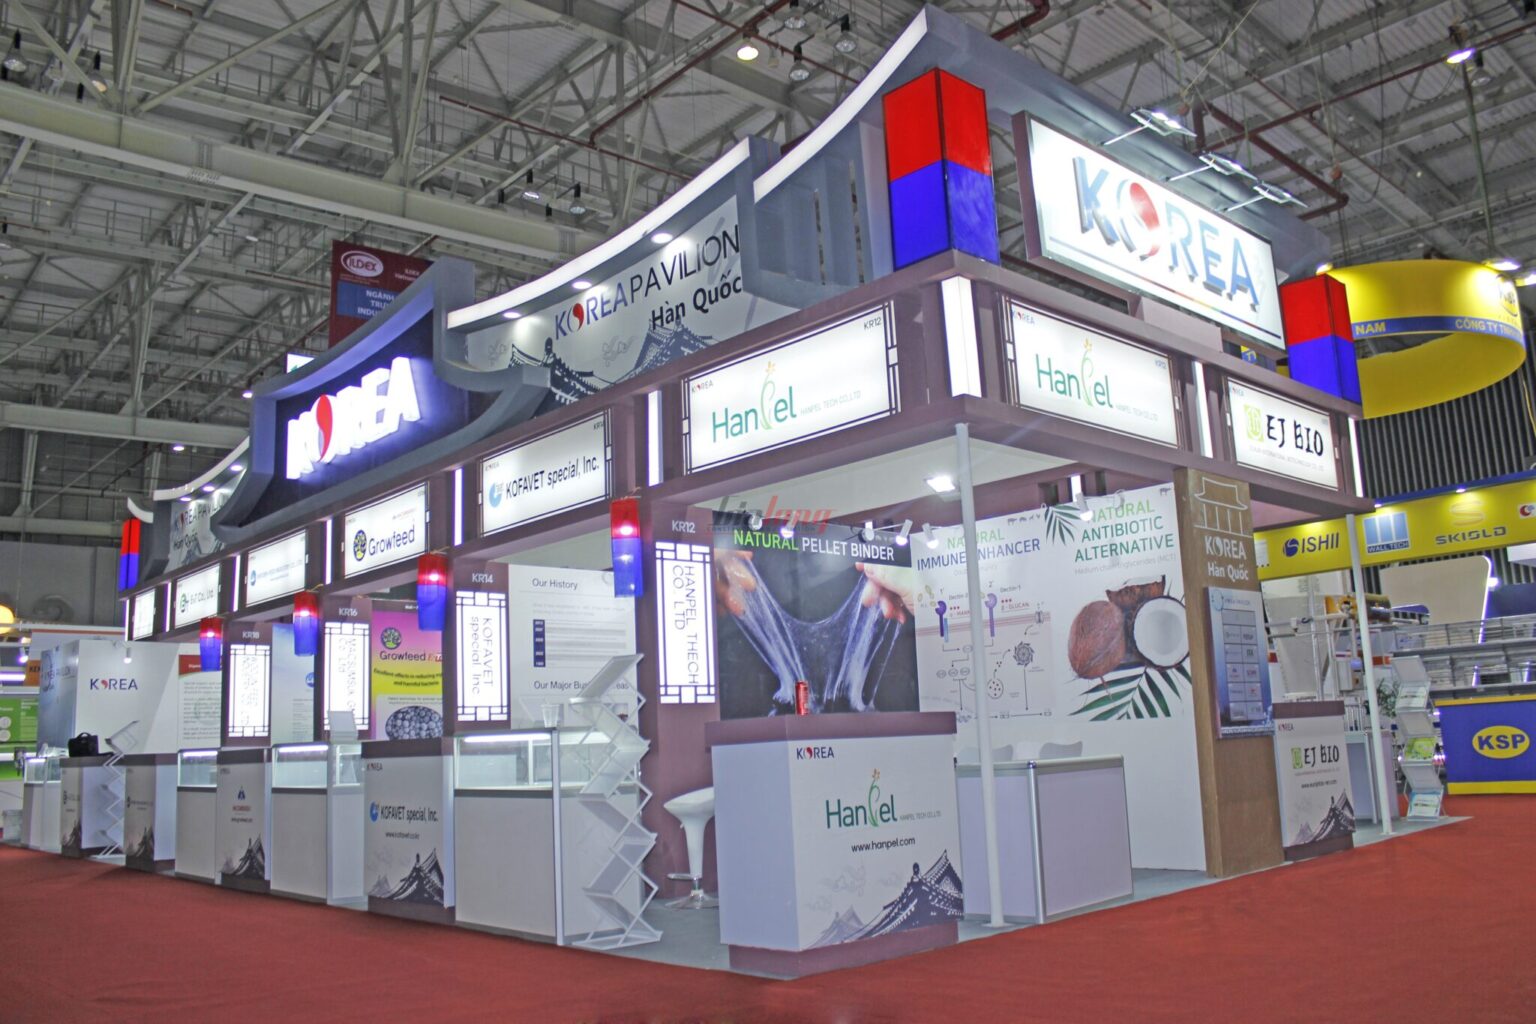 The exhibition booth was constructed by Gia Long